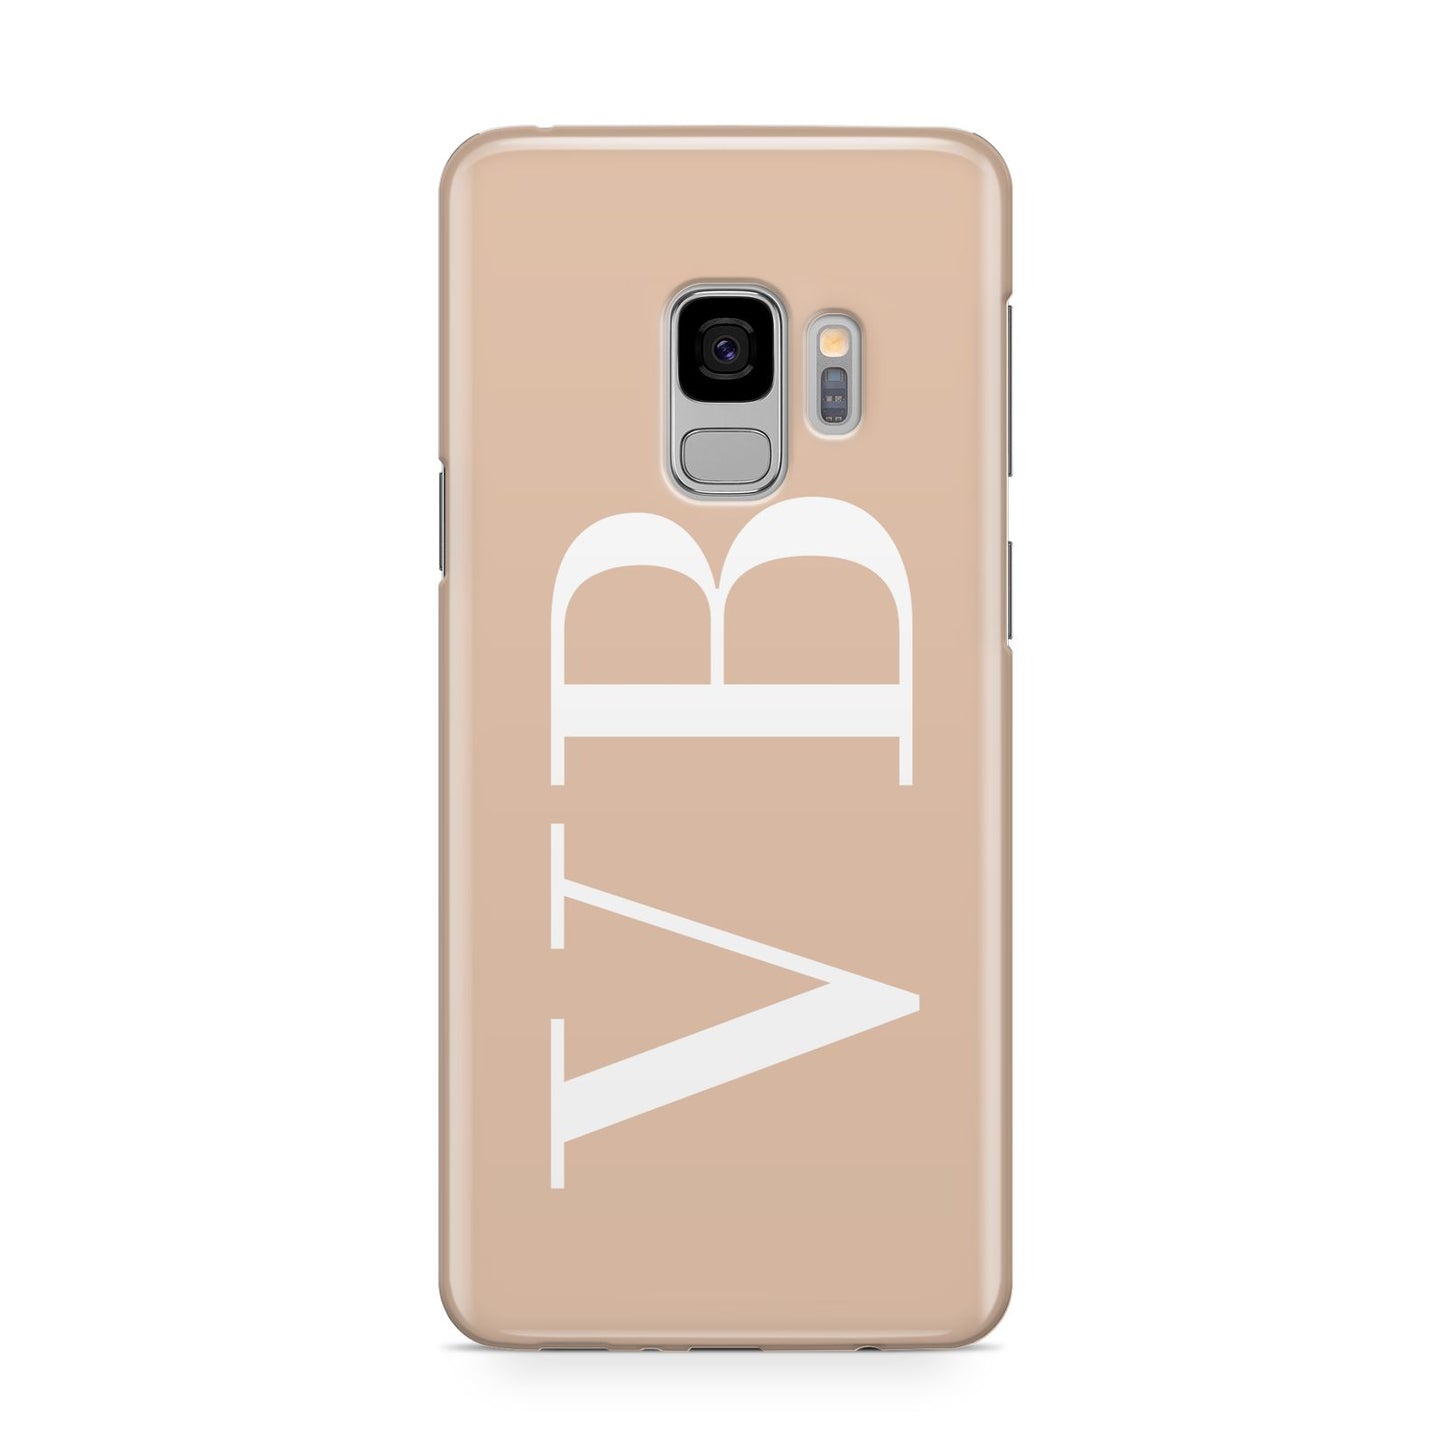 Nude And White Personalised Samsung Galaxy S9 Case